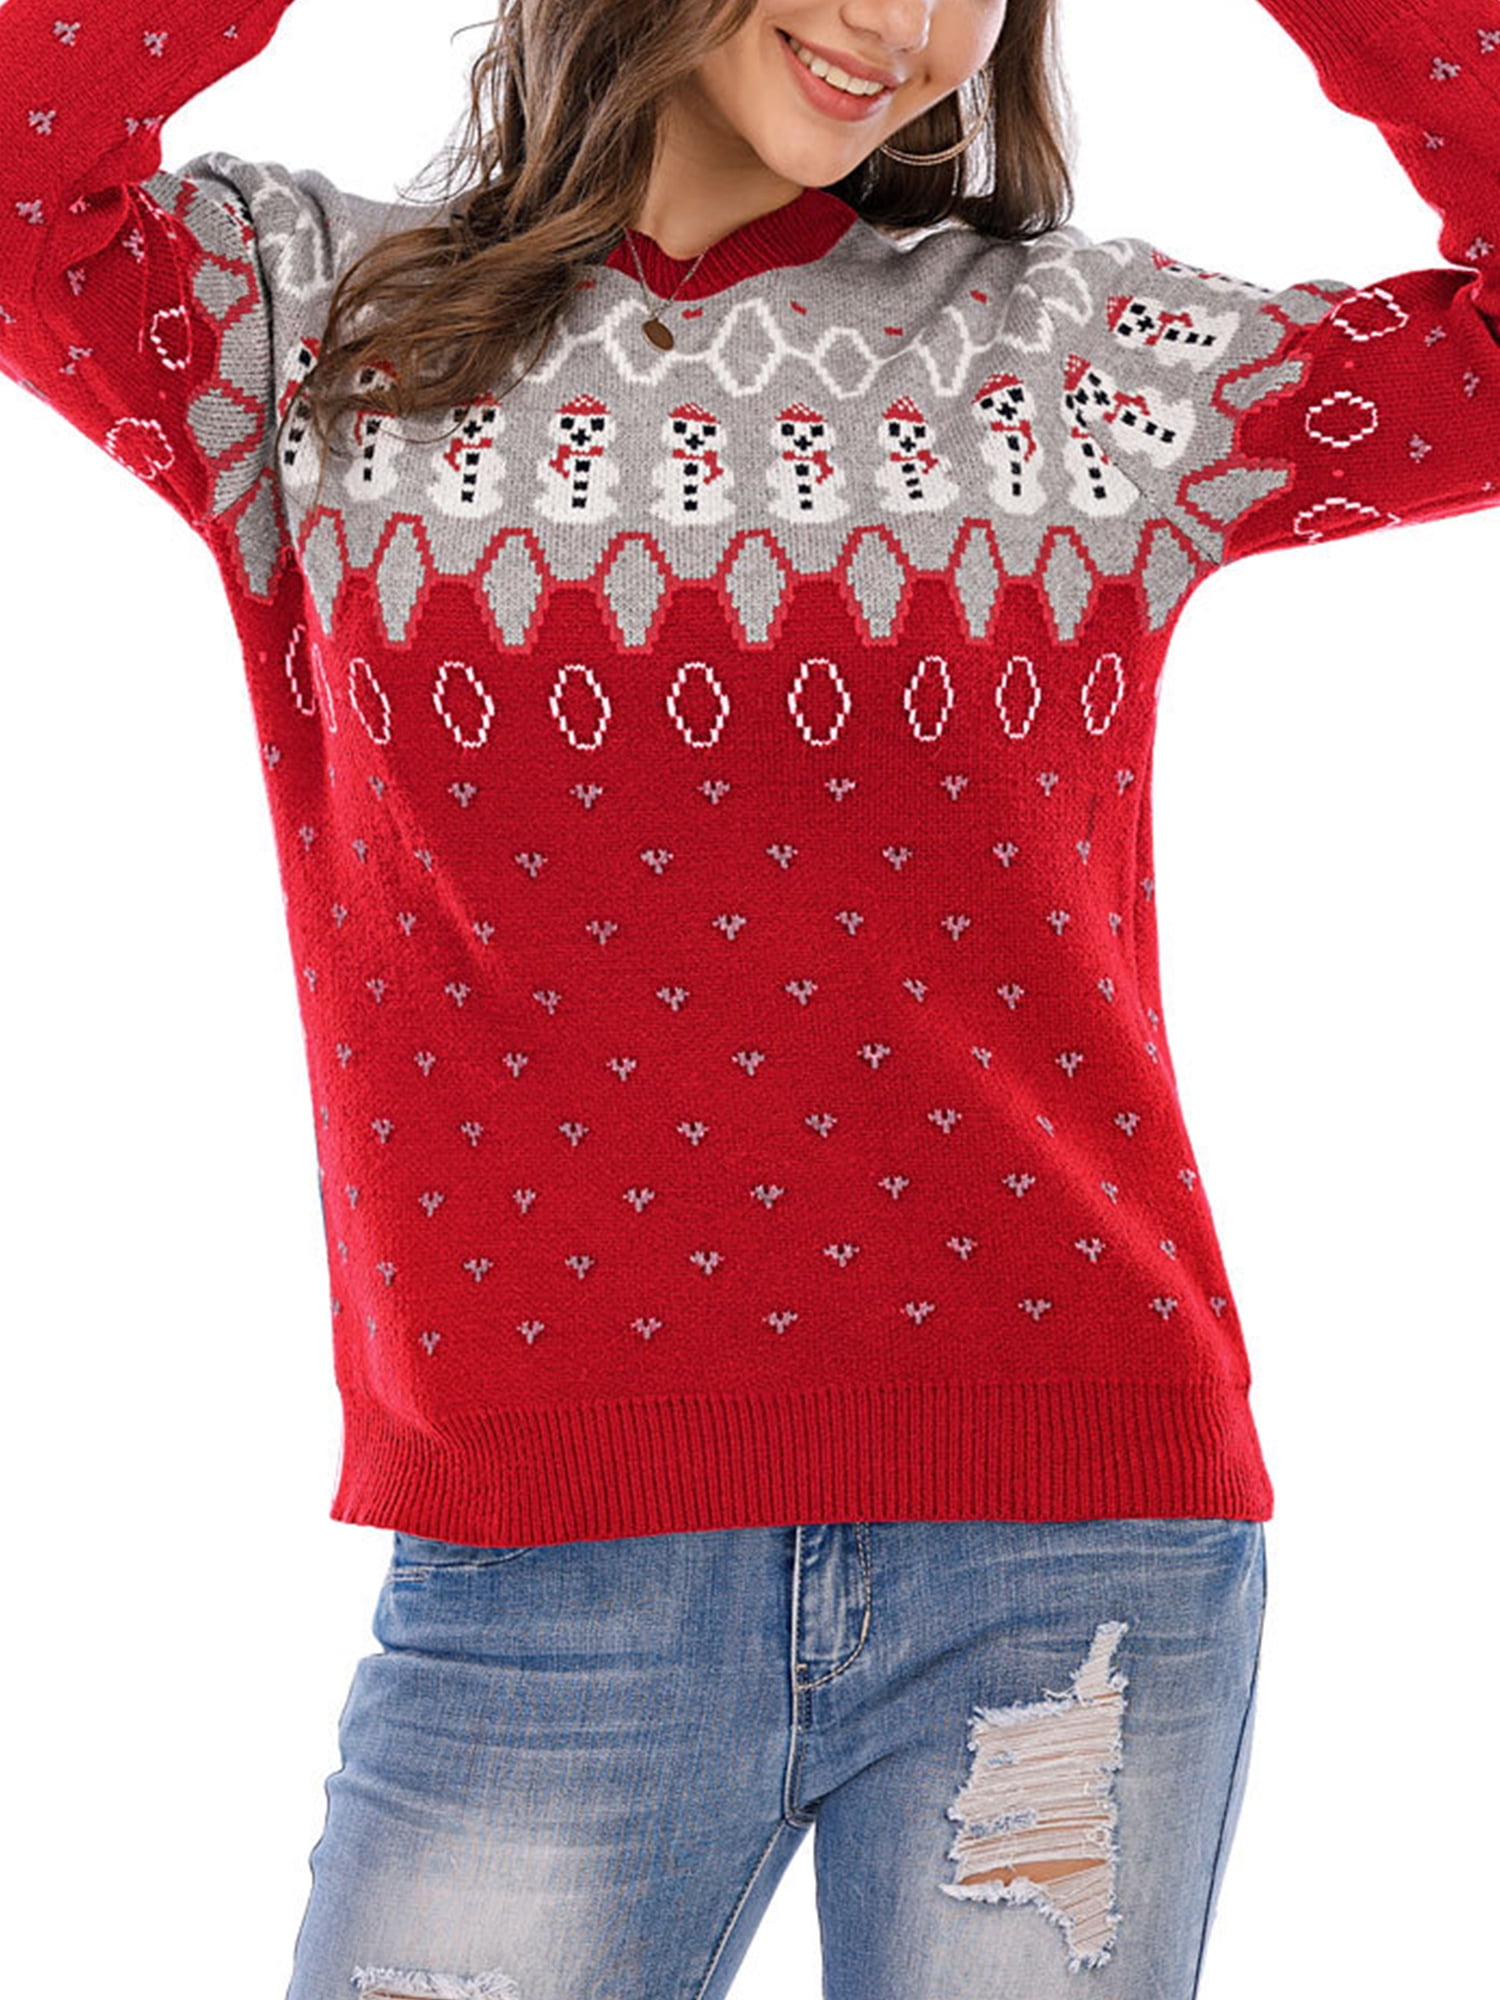 AODONG Christmas Sweatshirts for Women,Christmas Printed Long Sleeve Shirts Loose Casual Tops Blouses Sweater Pullover